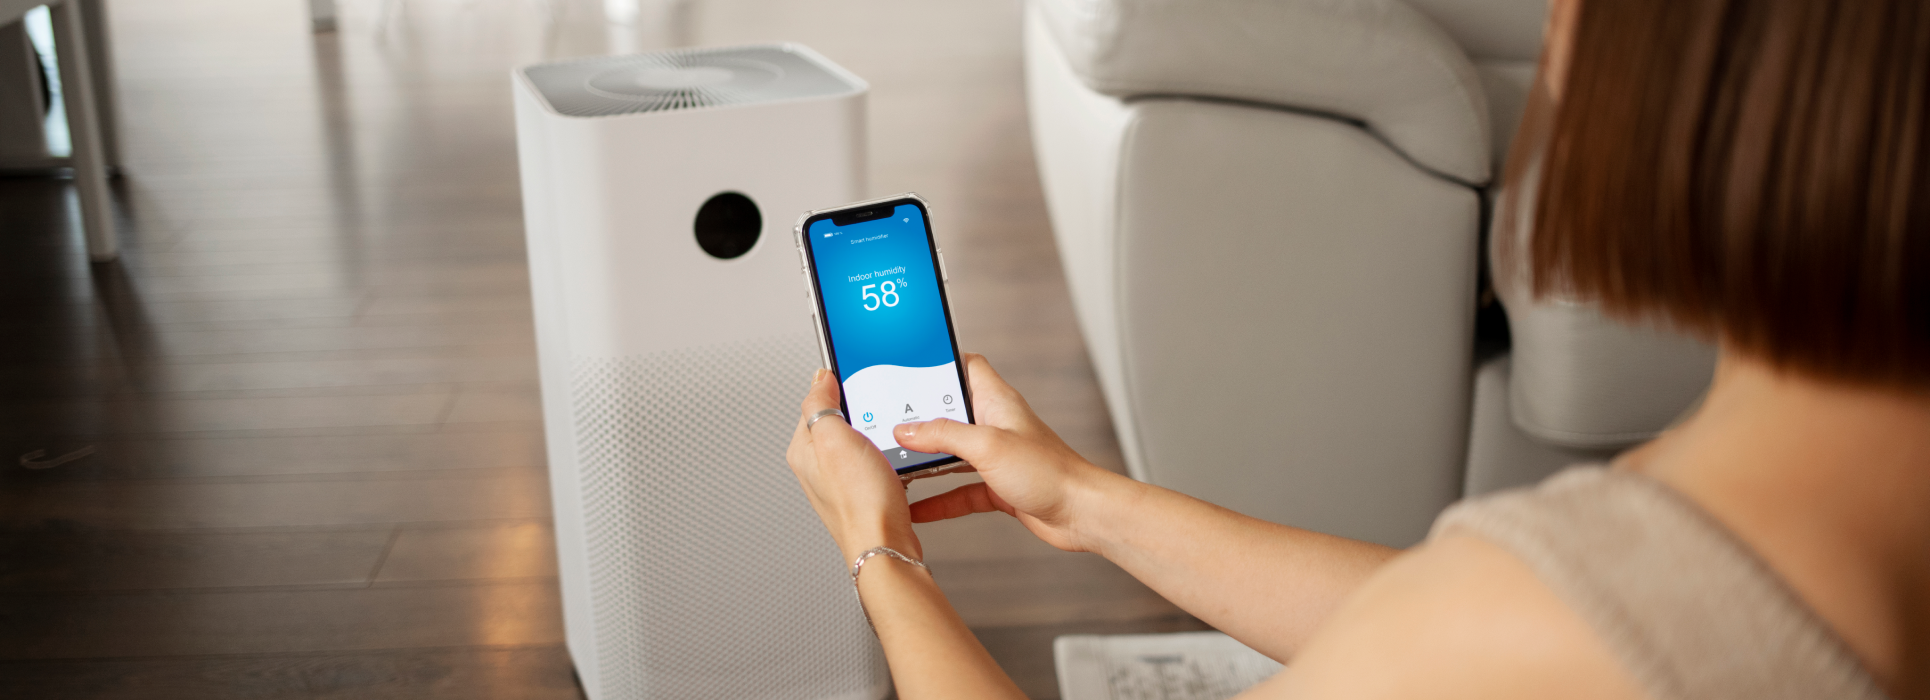 Simplify Your Home With Useful Smart Home Gadgets